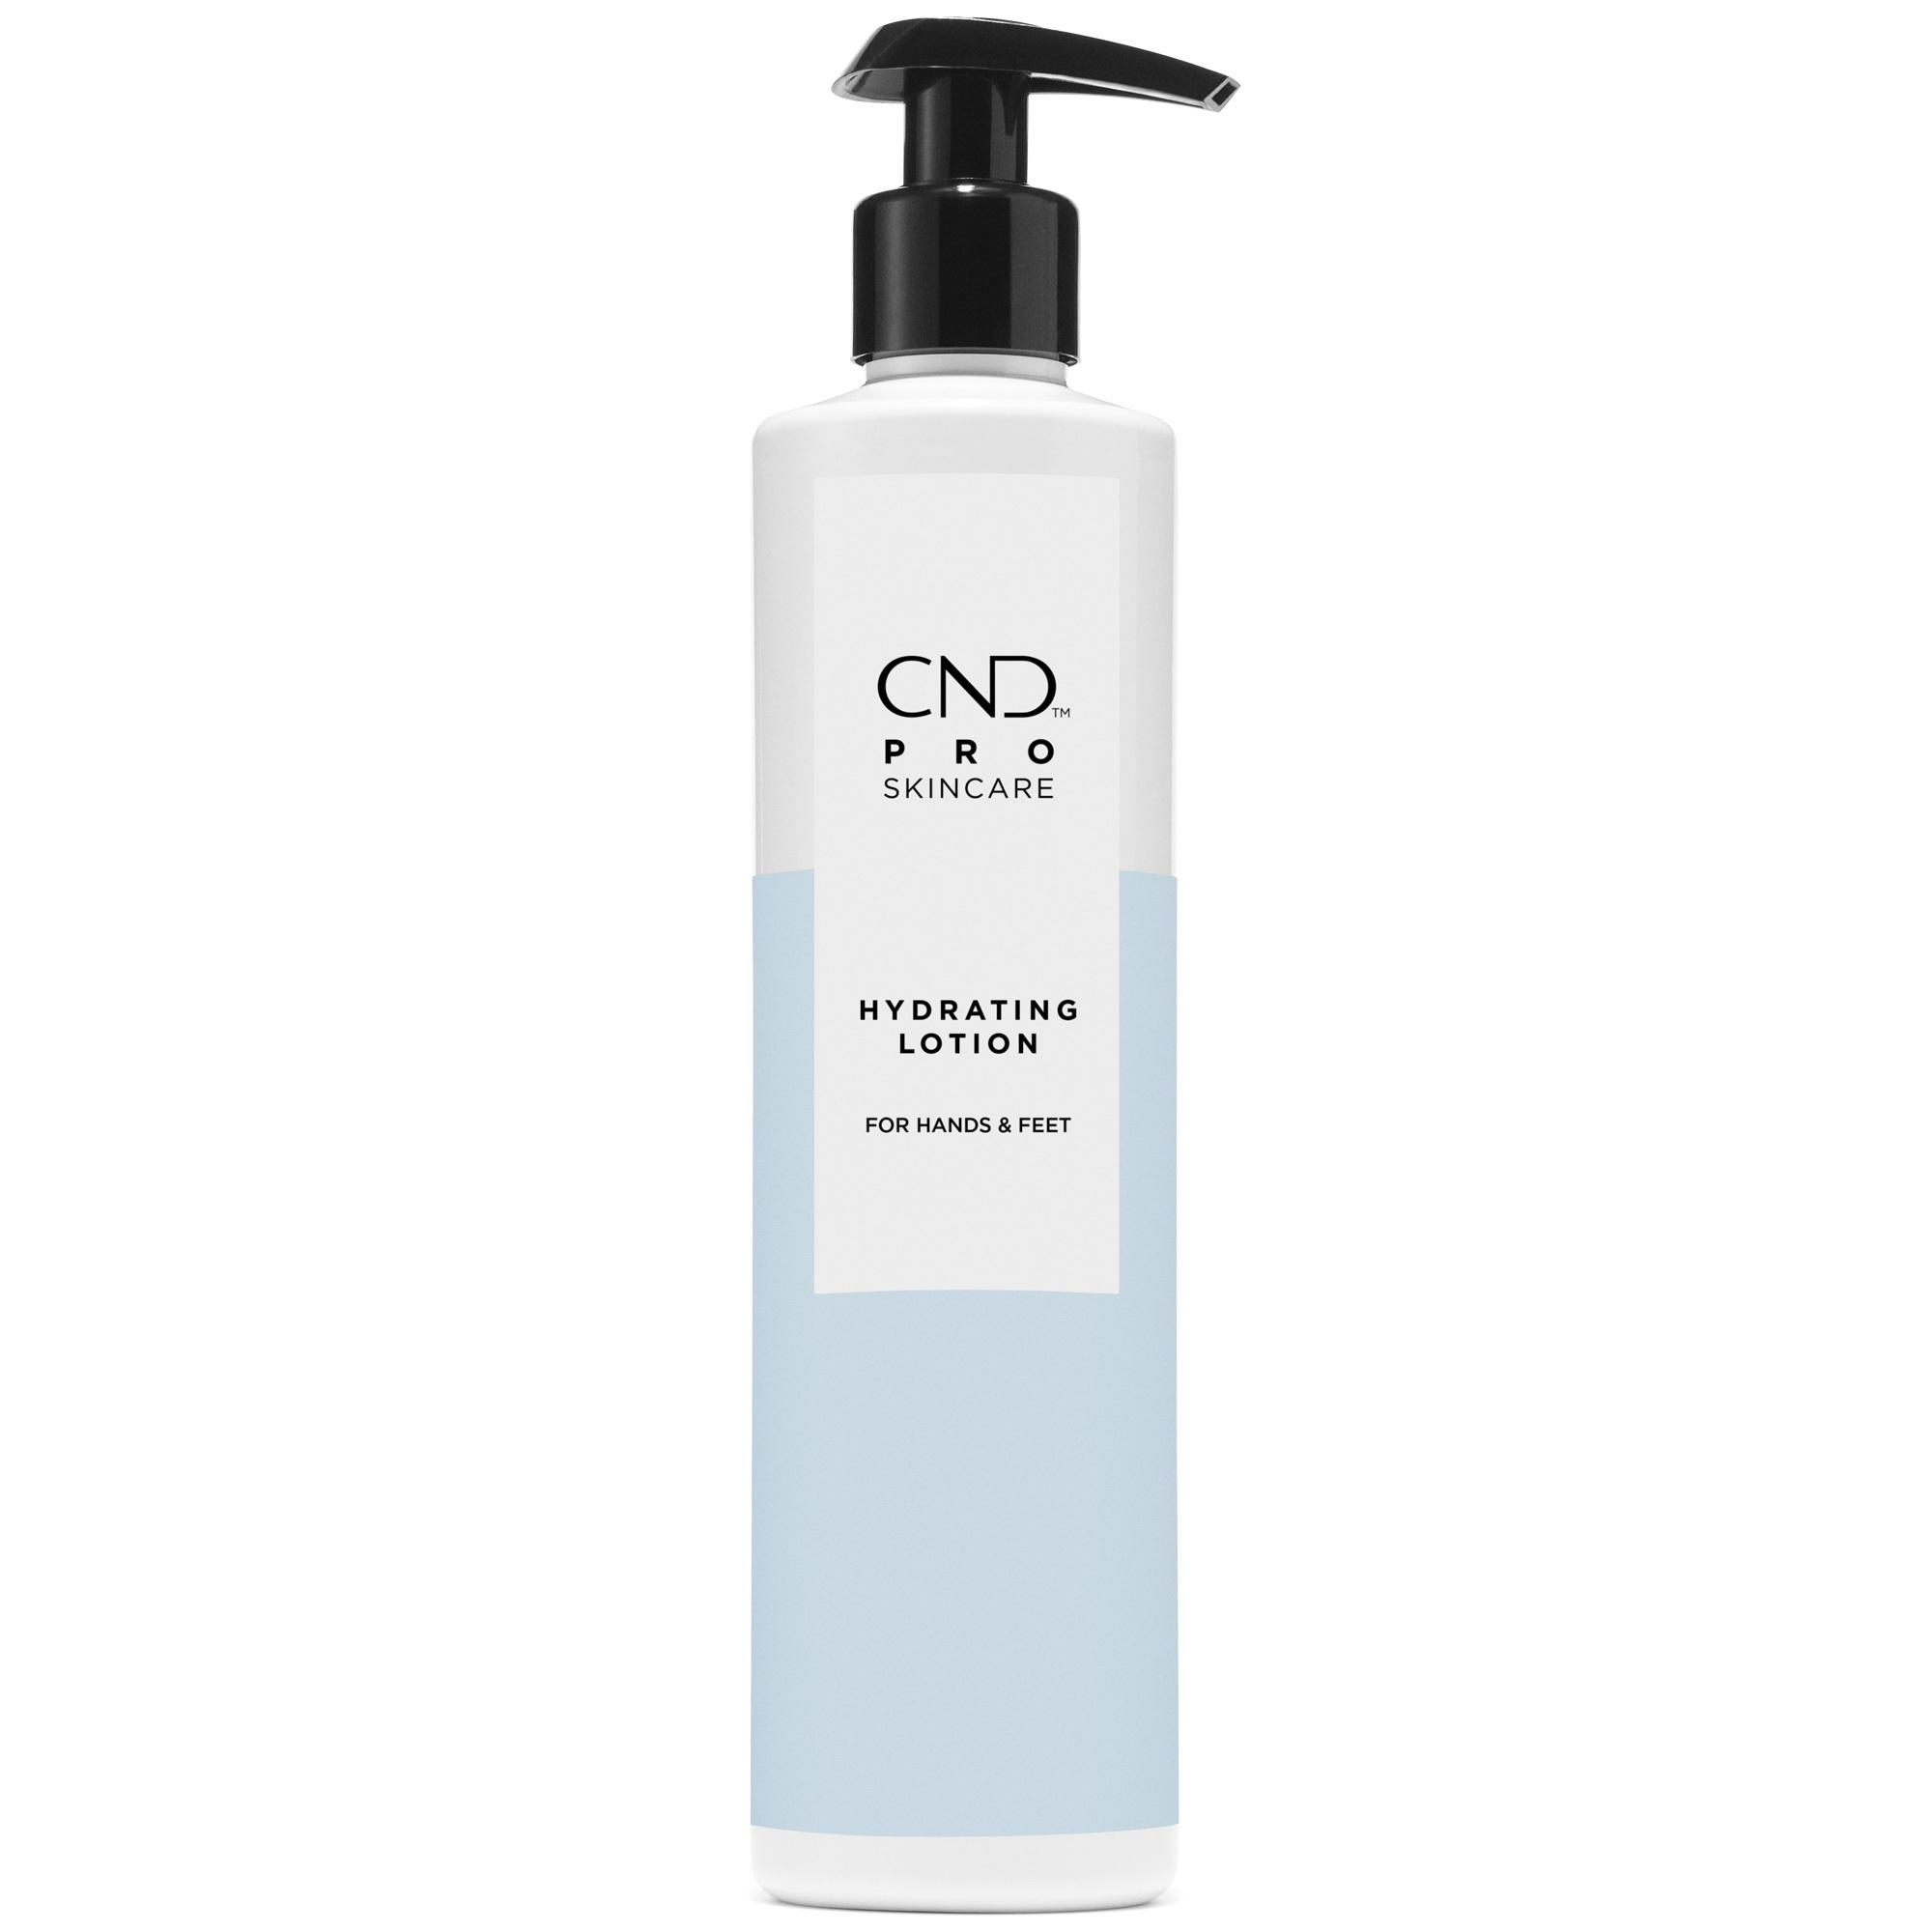 CND Pro SkinCare Hydrating Lotion (for hands & feet)